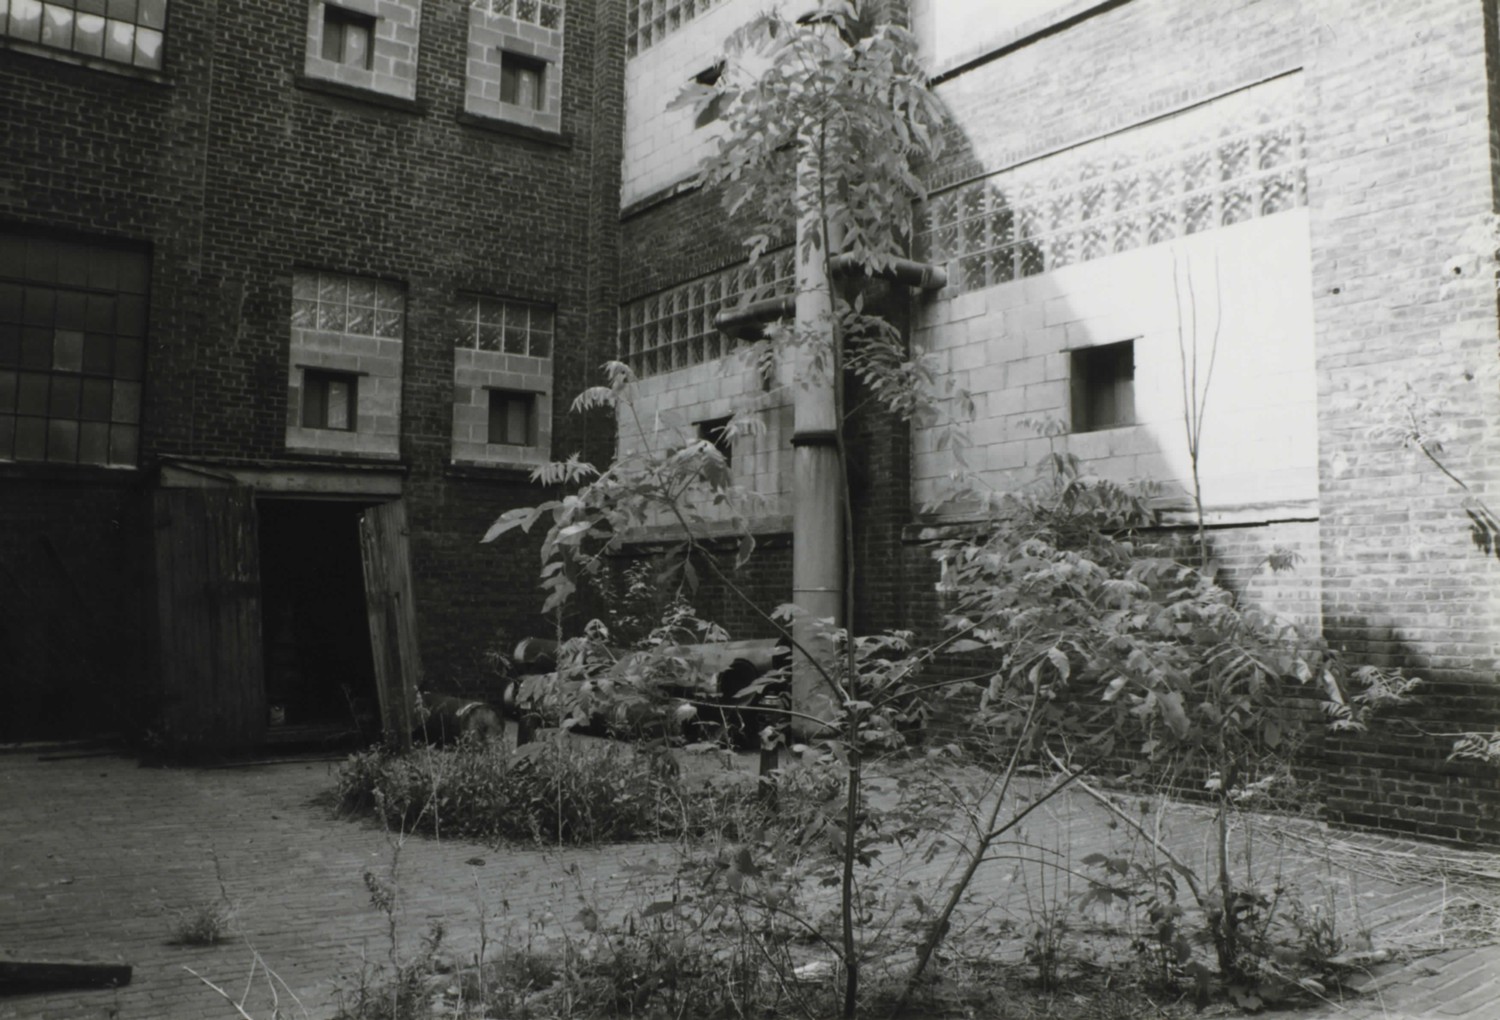 Federal Knitting Mills Building, Cleveland Ohio Courtyard (1999)